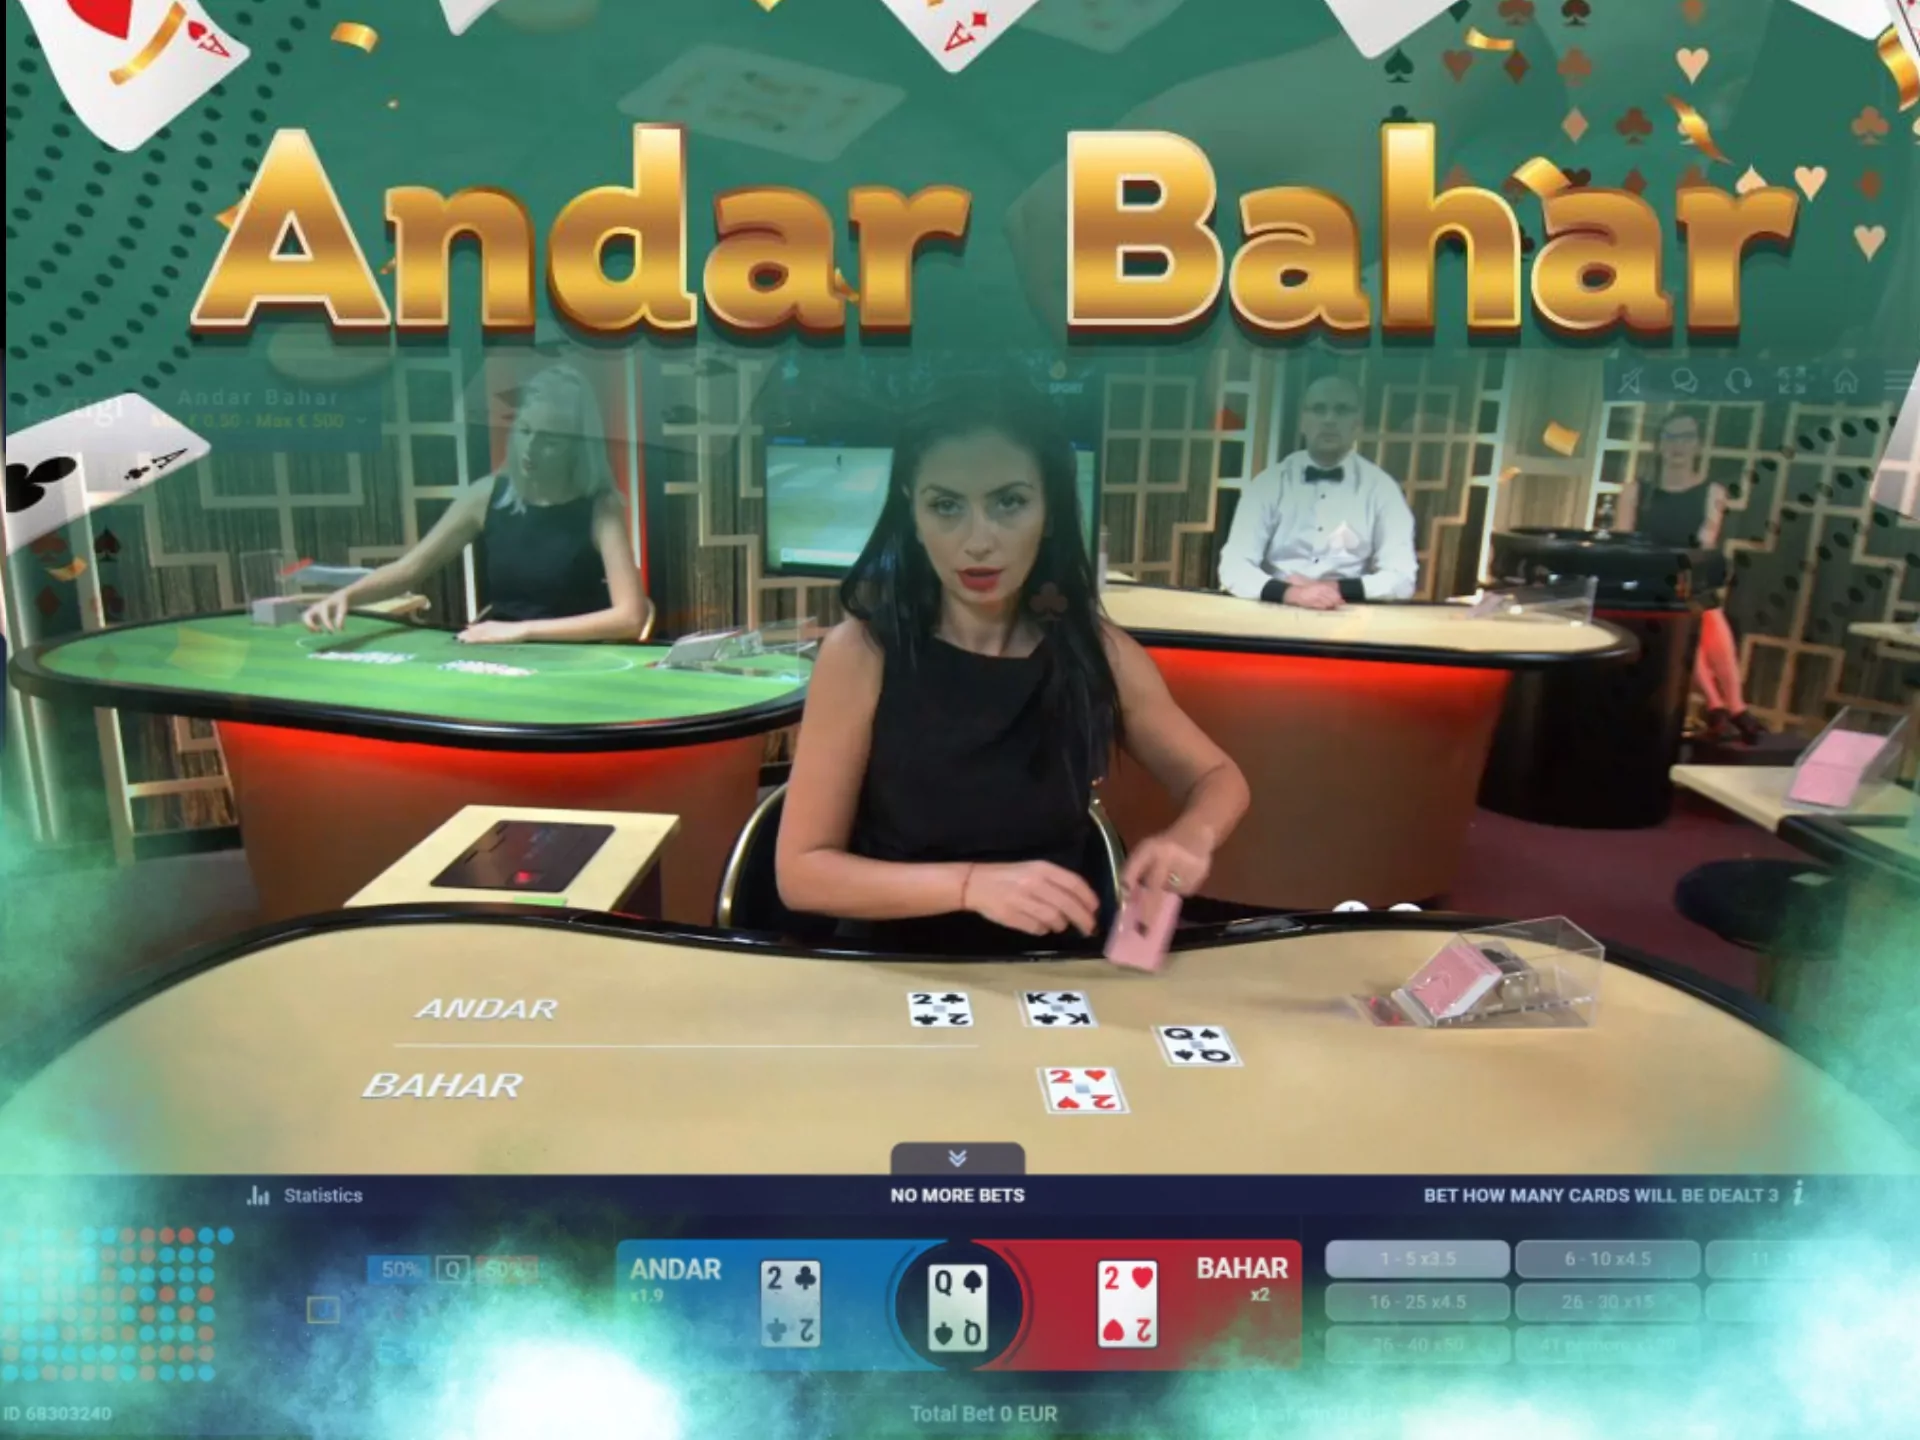 Almost every big online casino in India provides Andar Bahar online.